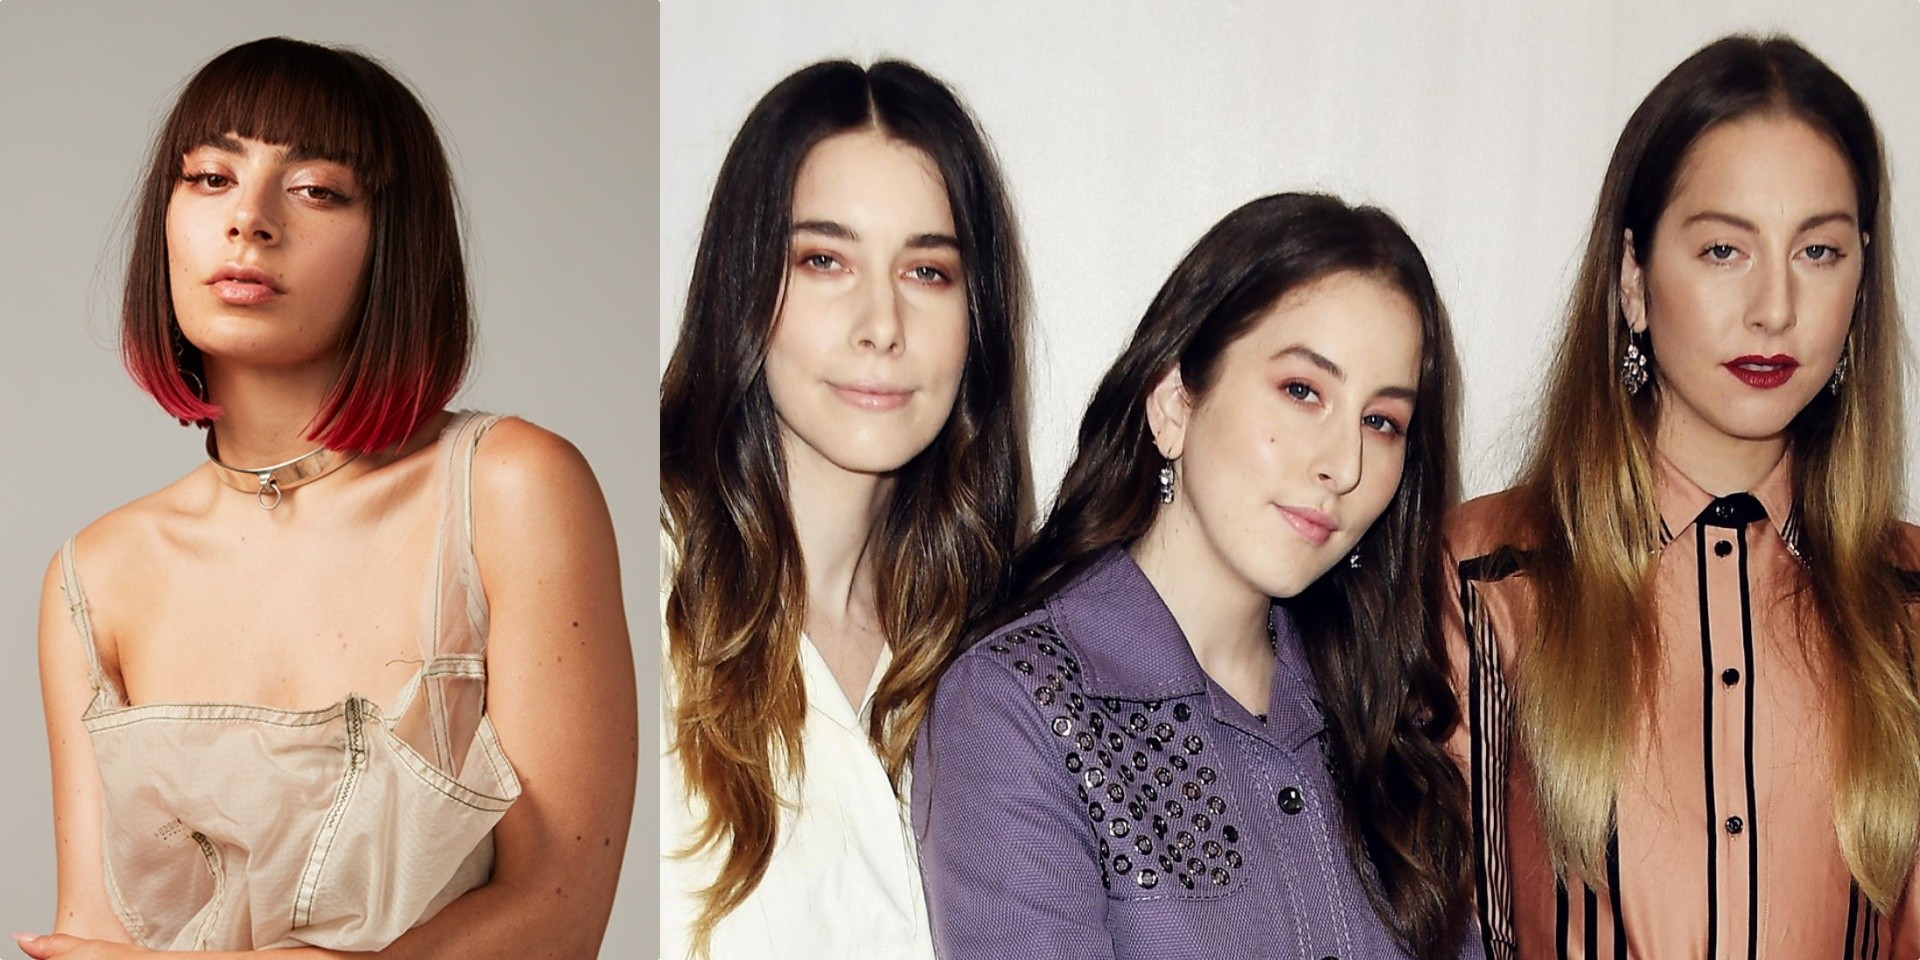 Charli XCX and HAIM come together to release new track, 'Warm' – listen